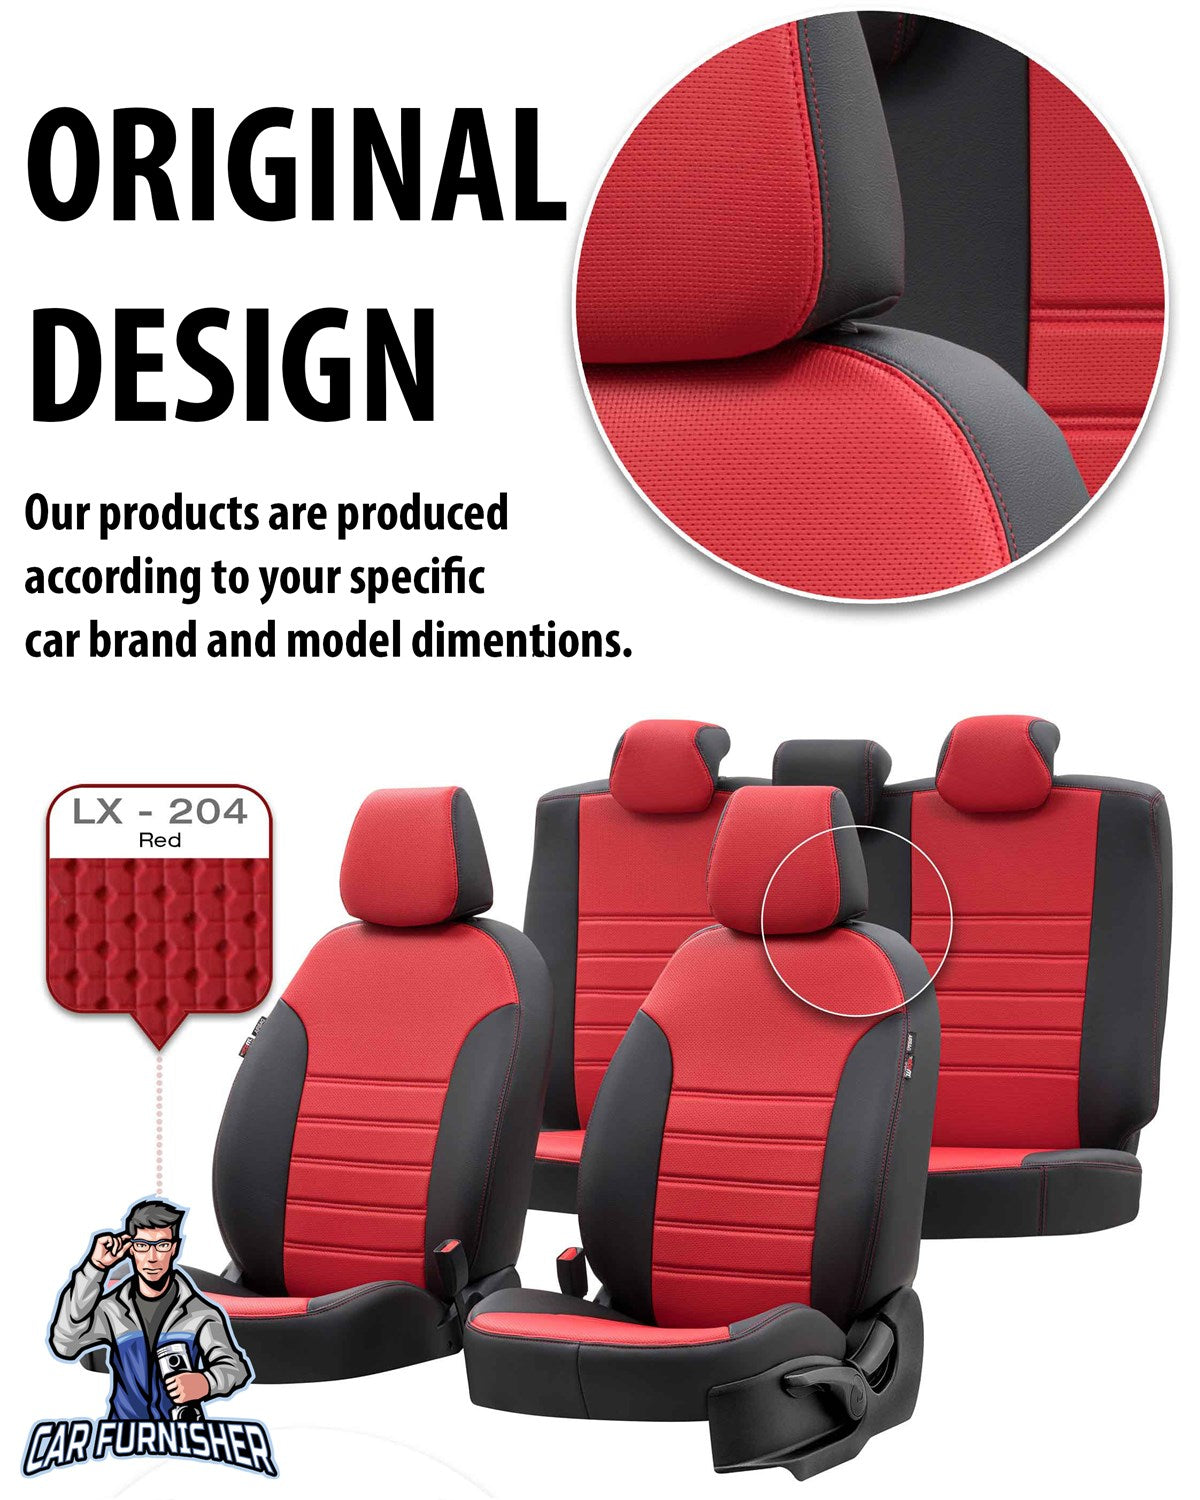 Volvo V70 Seat Cover New York Leather Design Smoked Leather